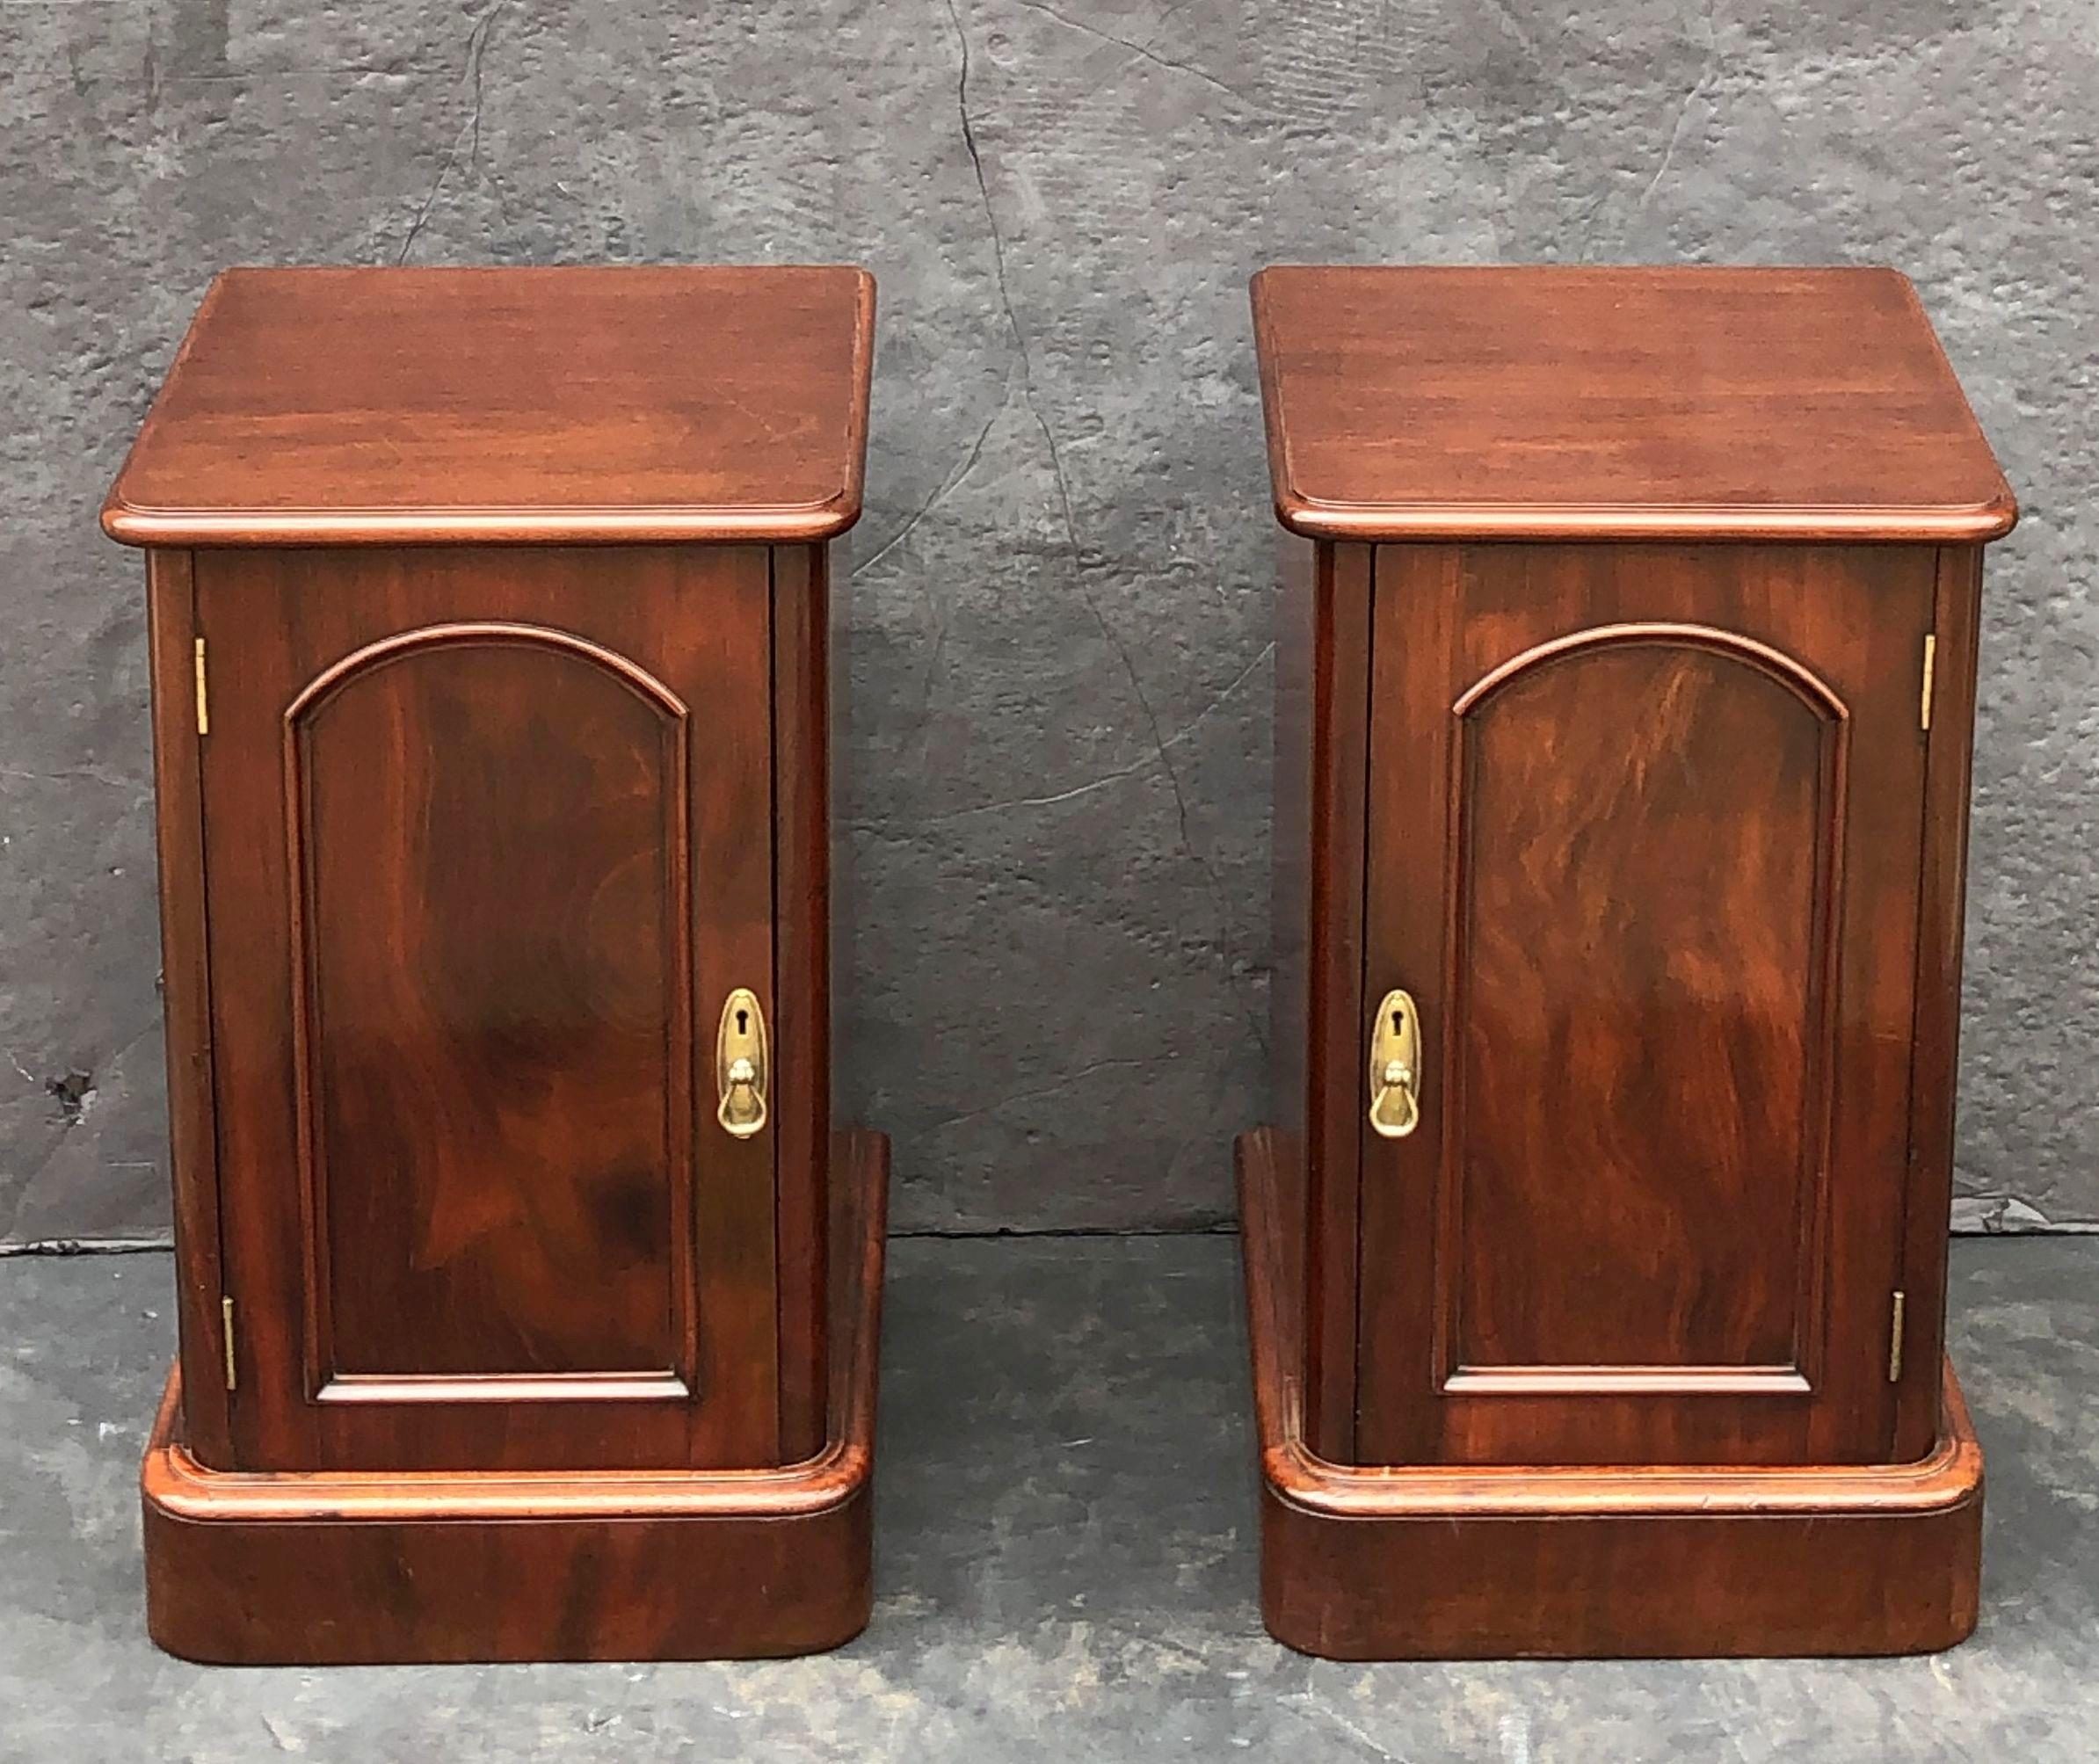 English Bedside Chests or Cabinet Nightstands of Mahogany, Priced as a Pair 2